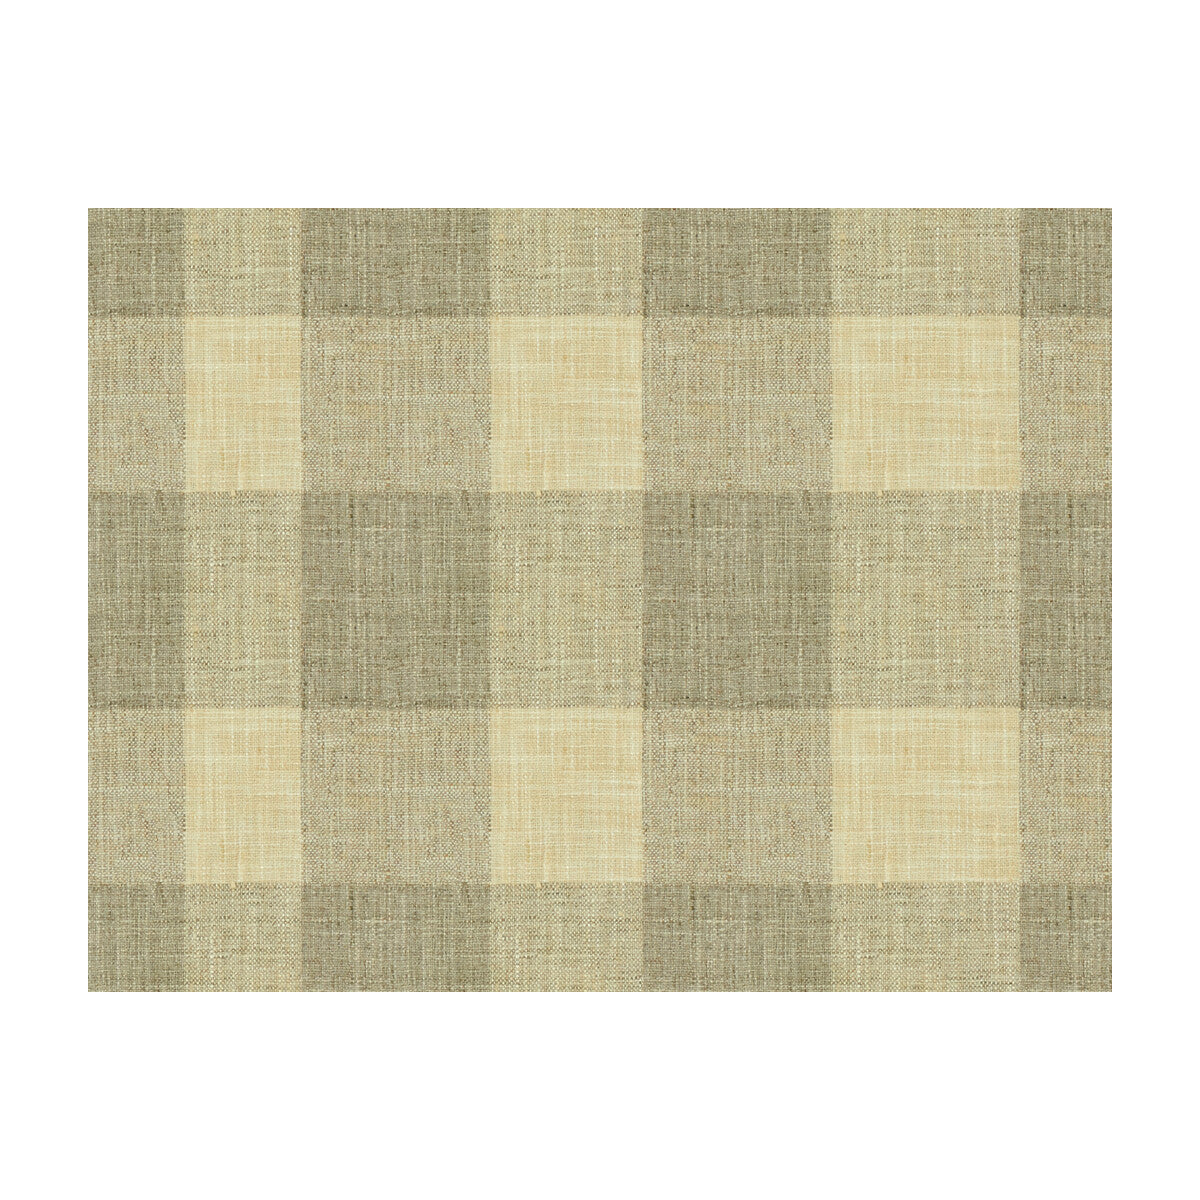 Kravet Basics fabric in 34090-1611 color - pattern 34090.1611.0 - by Kravet Basics in the Bungalow Chic II collection